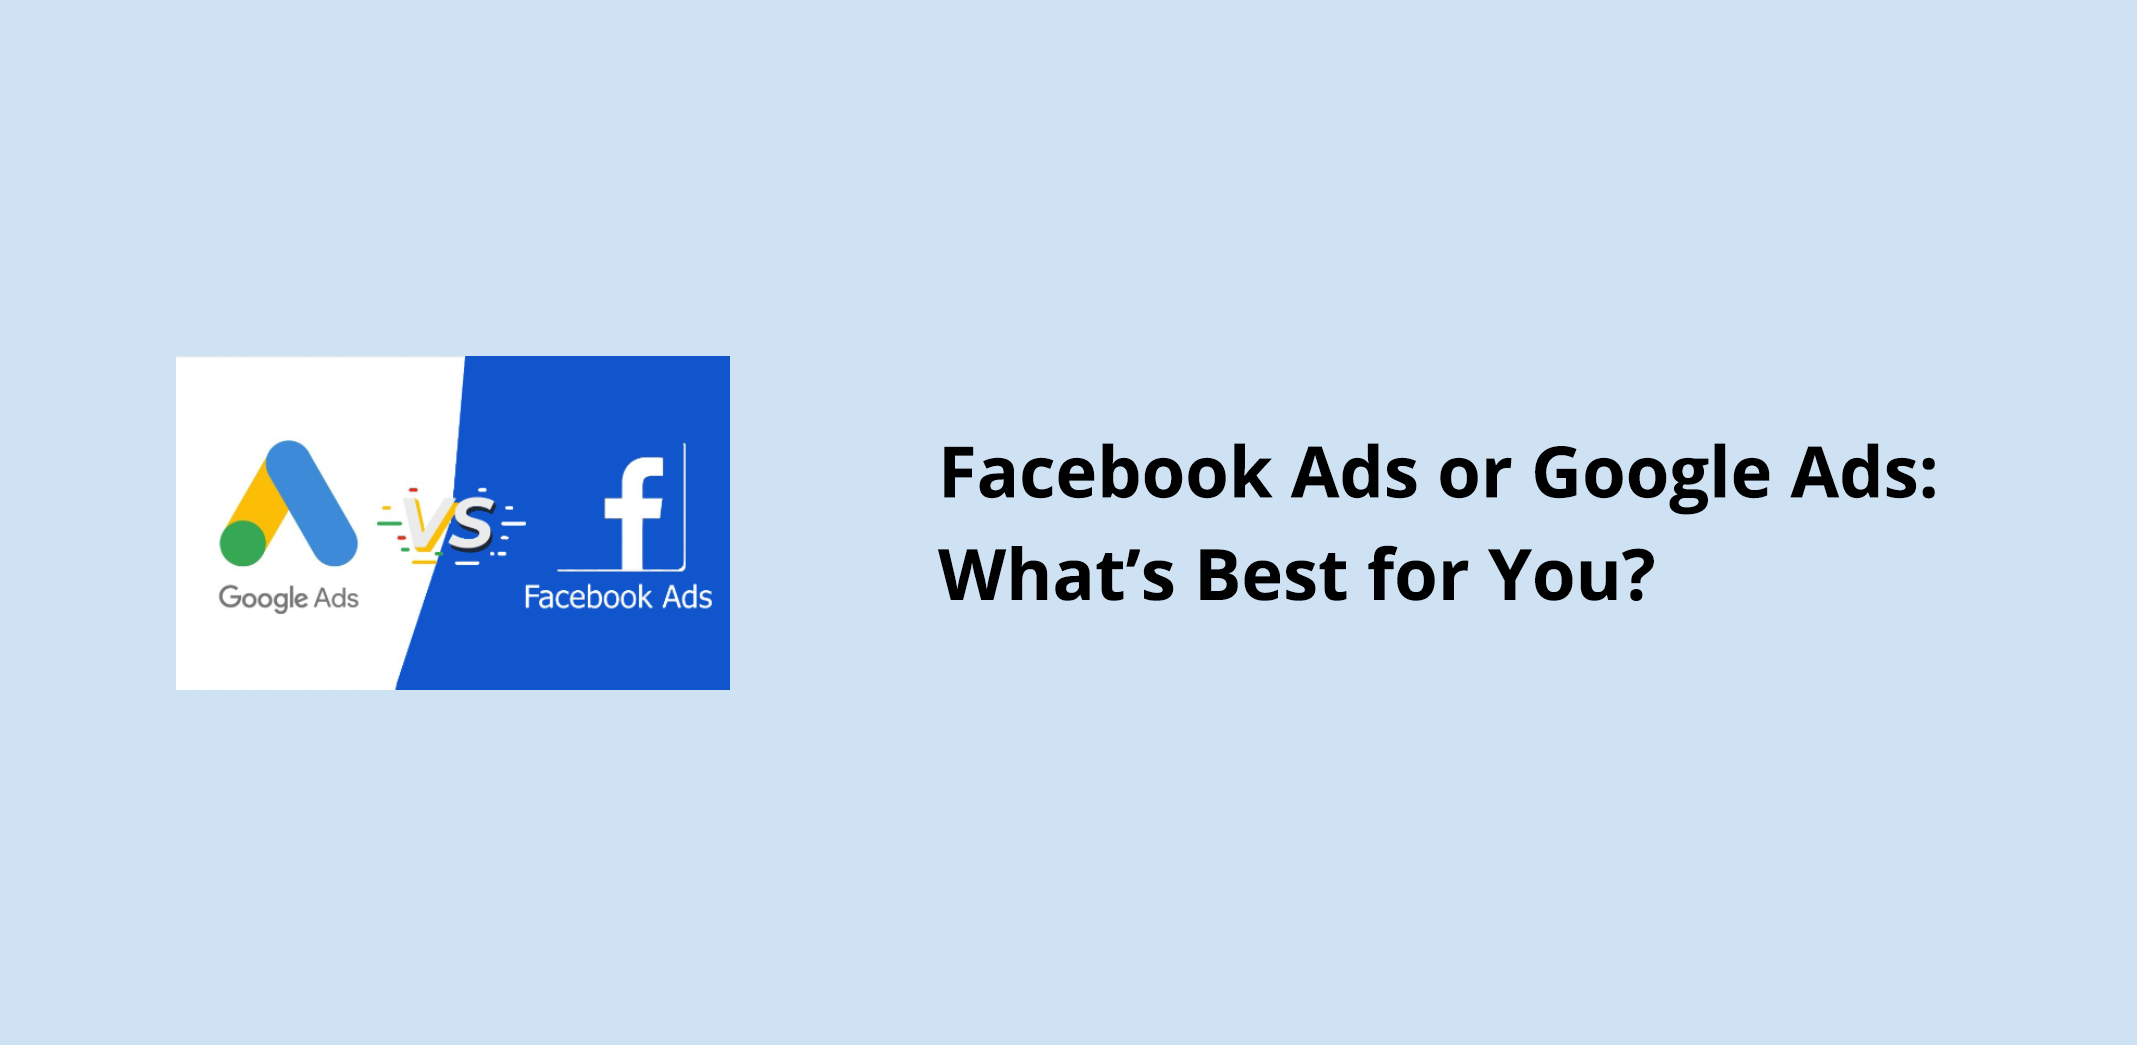 Facebook Ads or Google Ads: What’s Best for You?